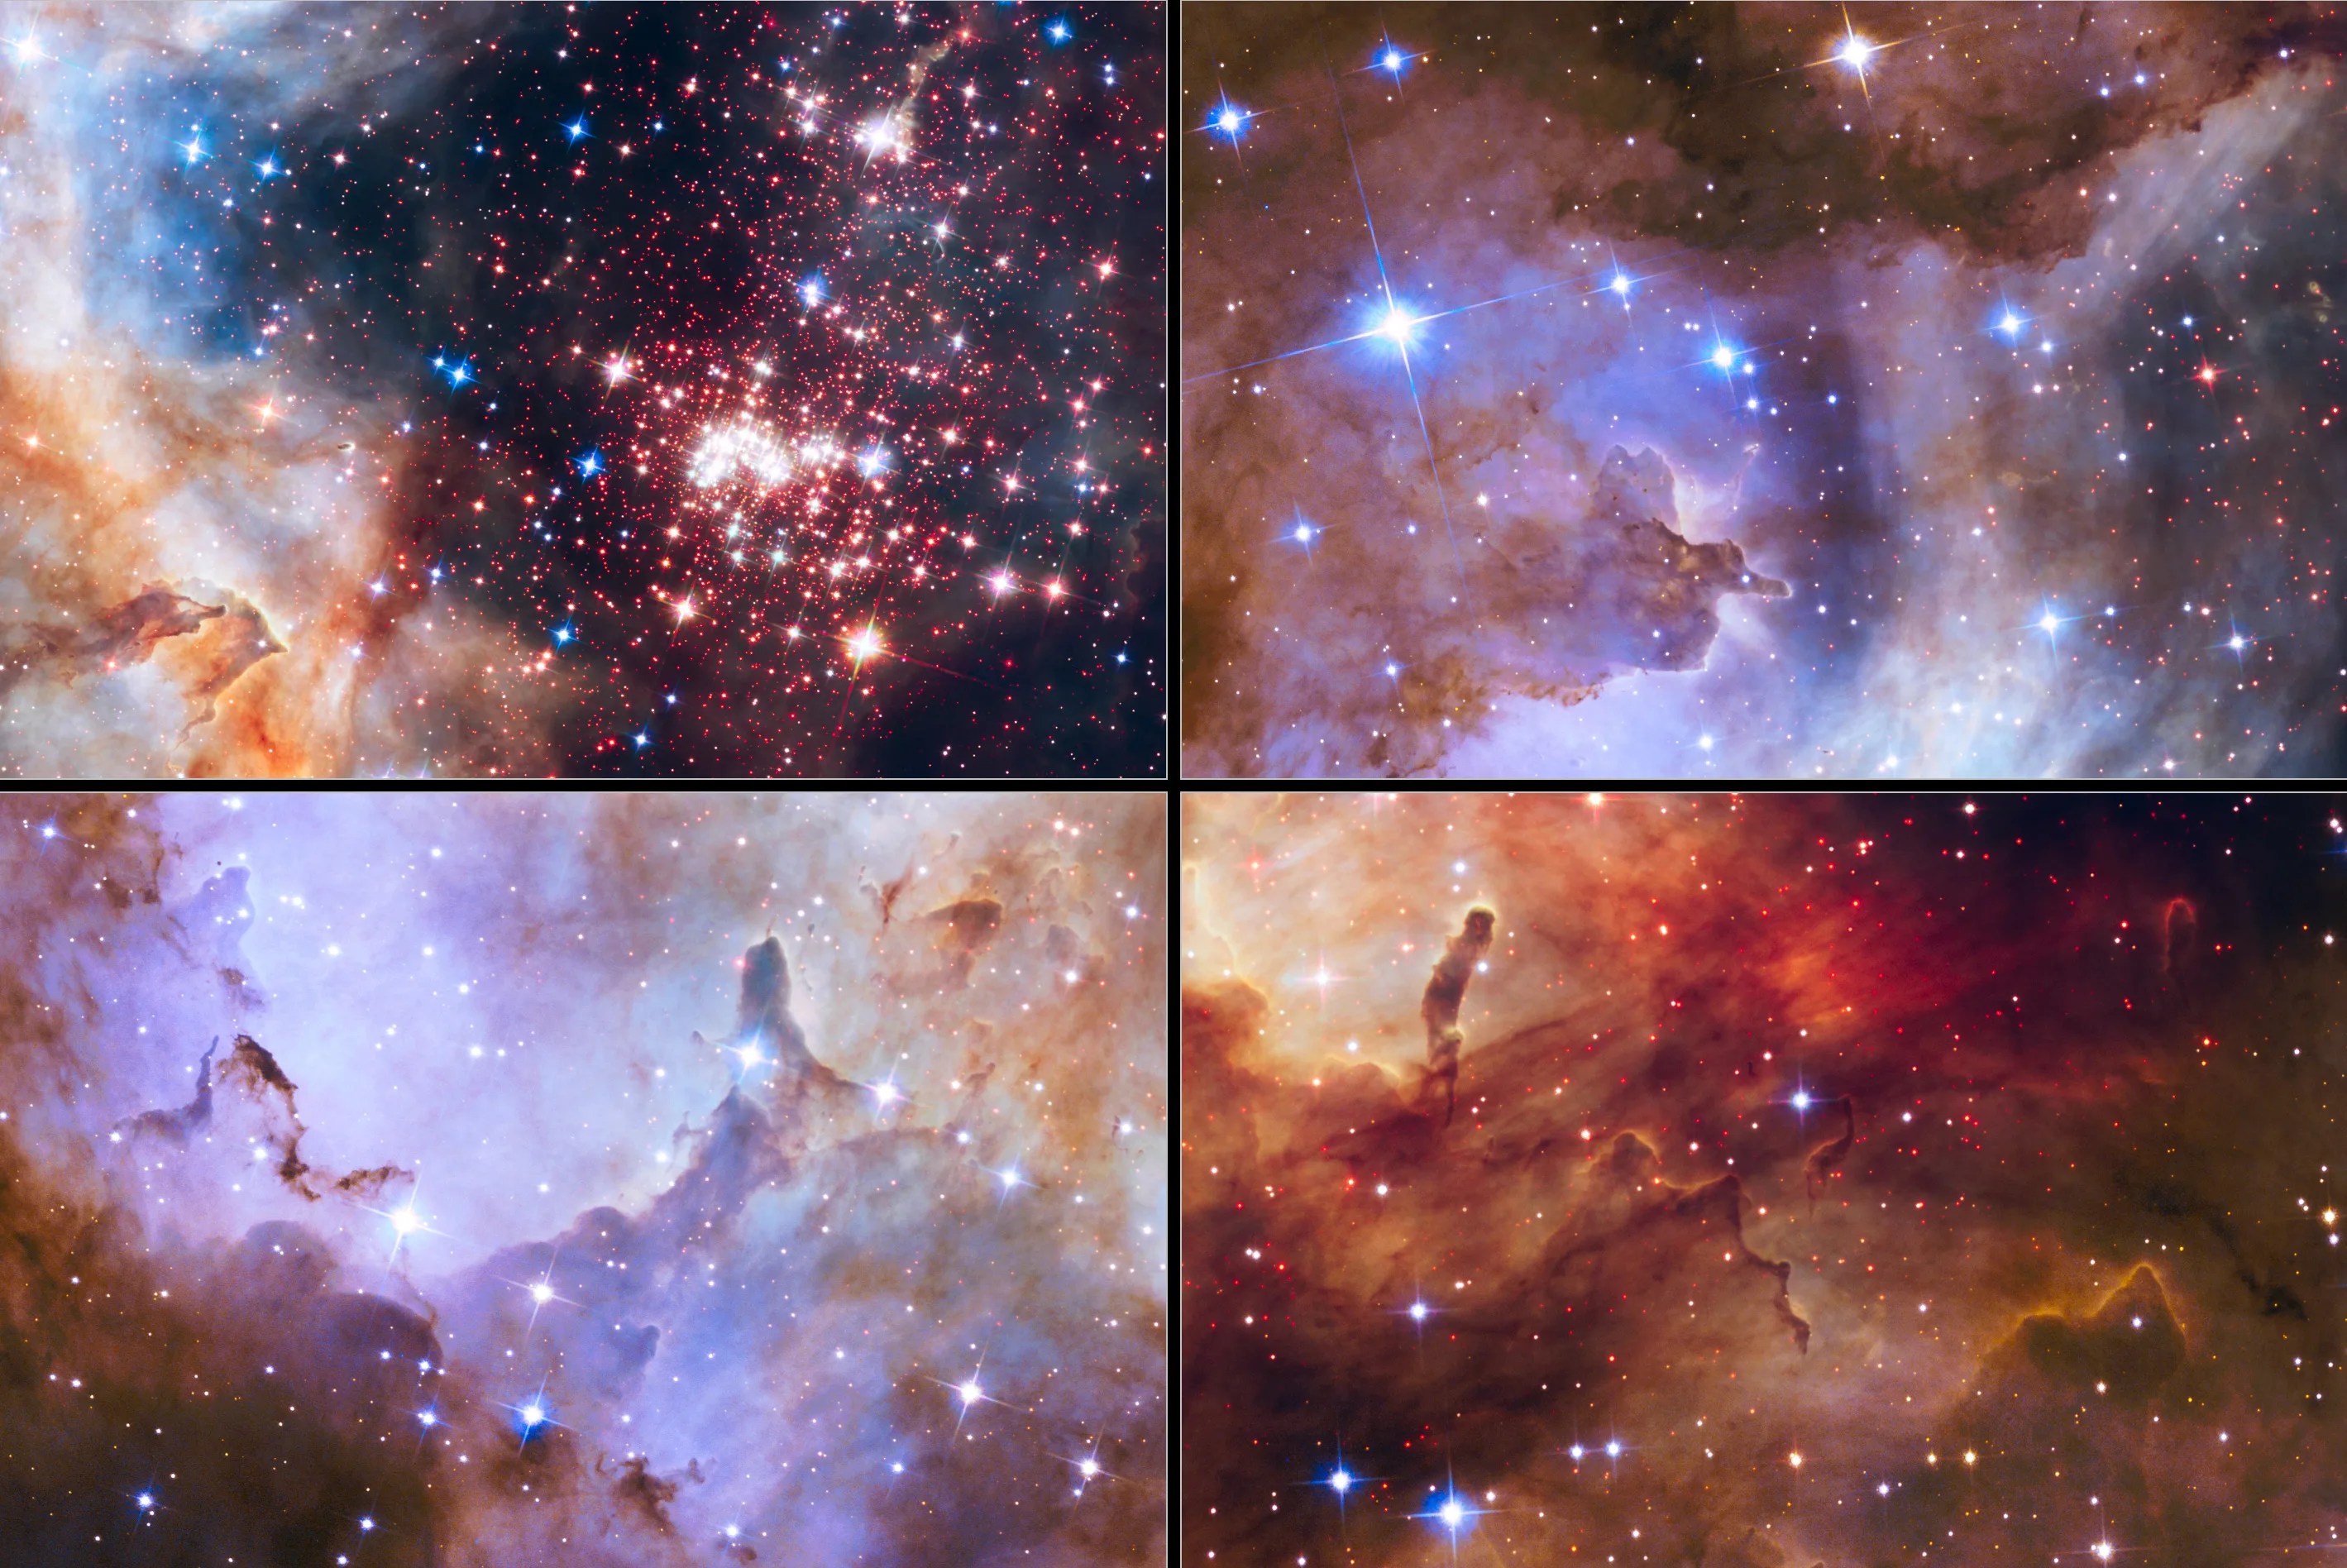 Four images focusing in on areas of Westerlund 2. Each image features bright stars and fantastic sculptures of gas and dust in shades of pale blue and orange.